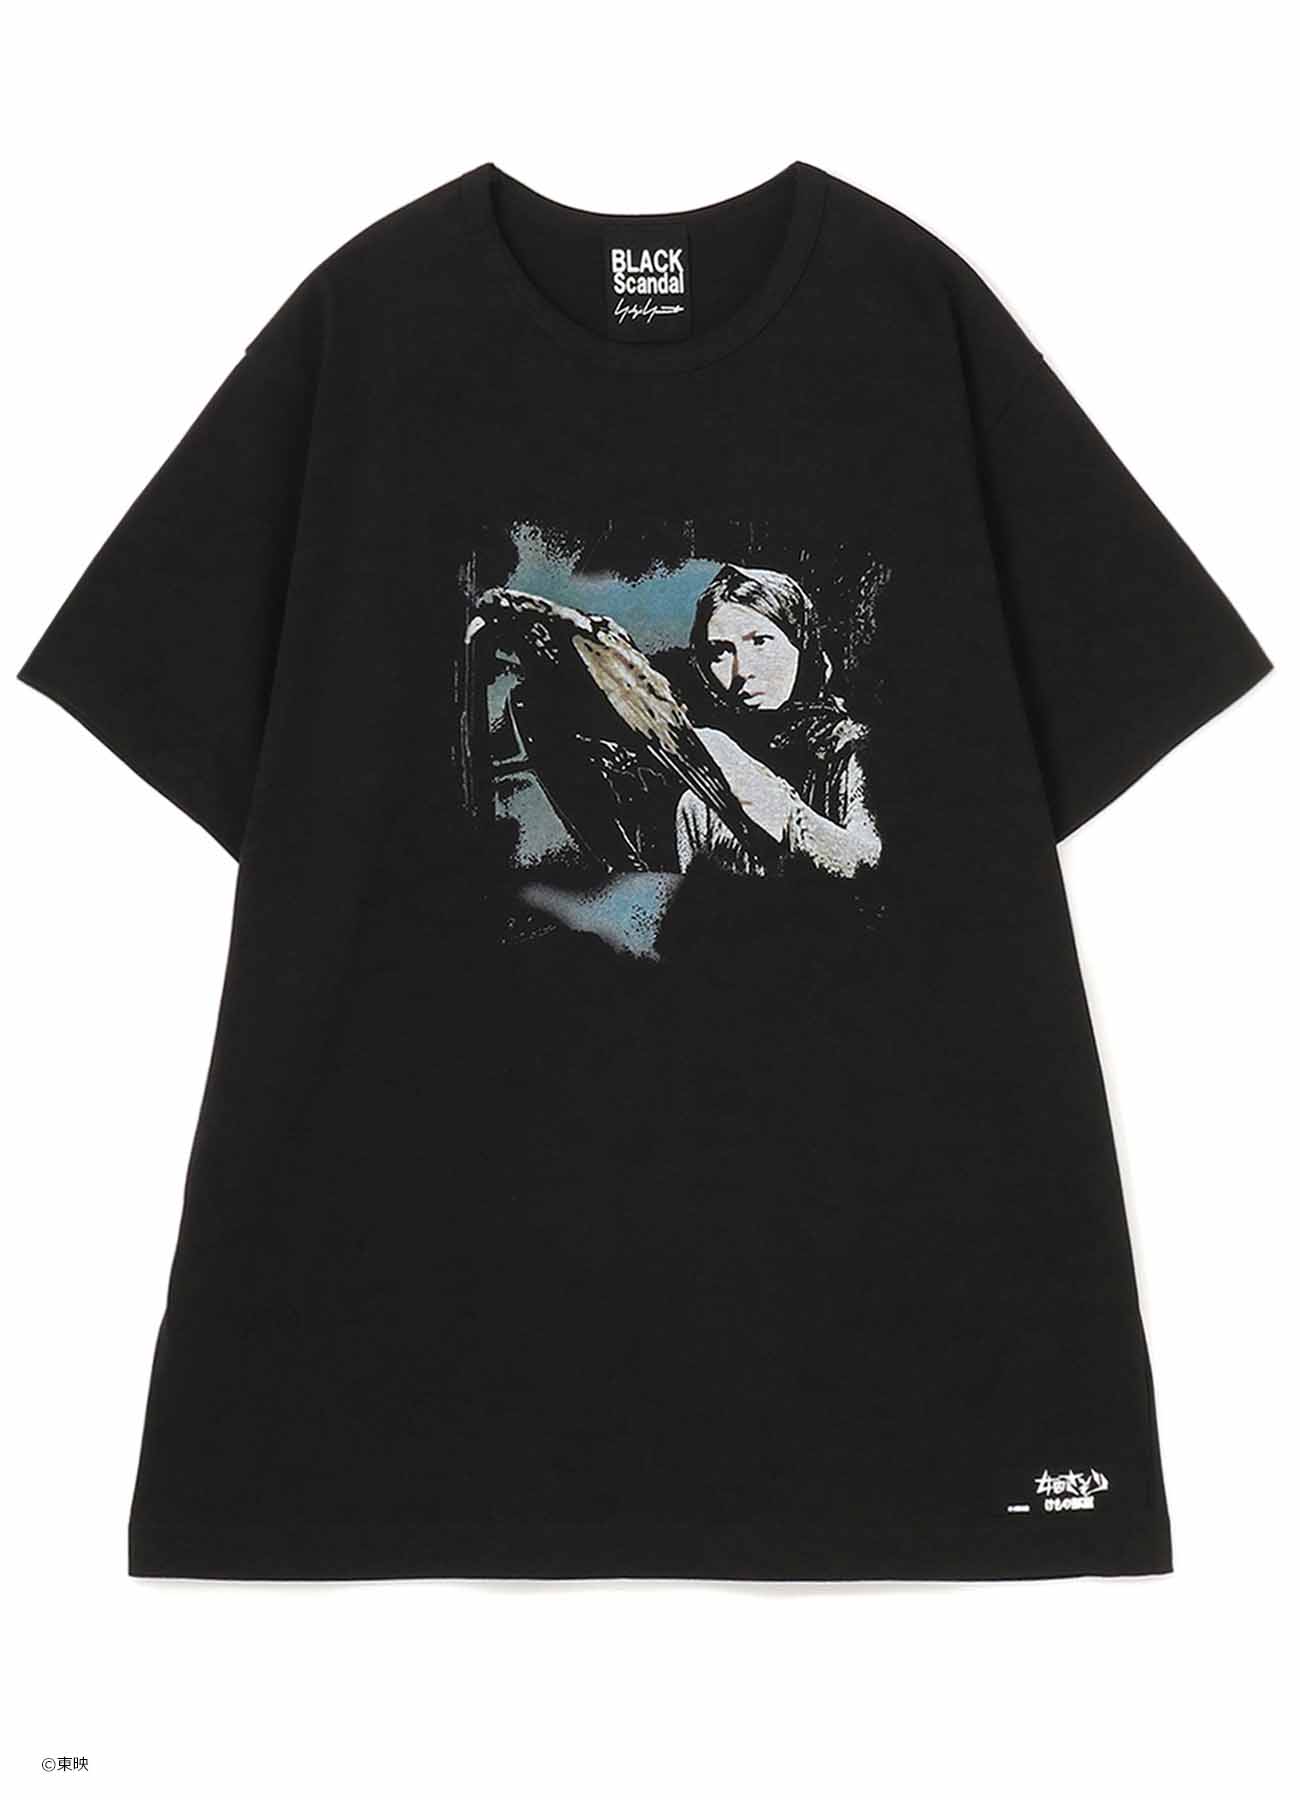 【5/24 10:00(JST) Release】FEMALE CONVICT: DEN OF BEAST SHORT SLEEVES CUT SEWN